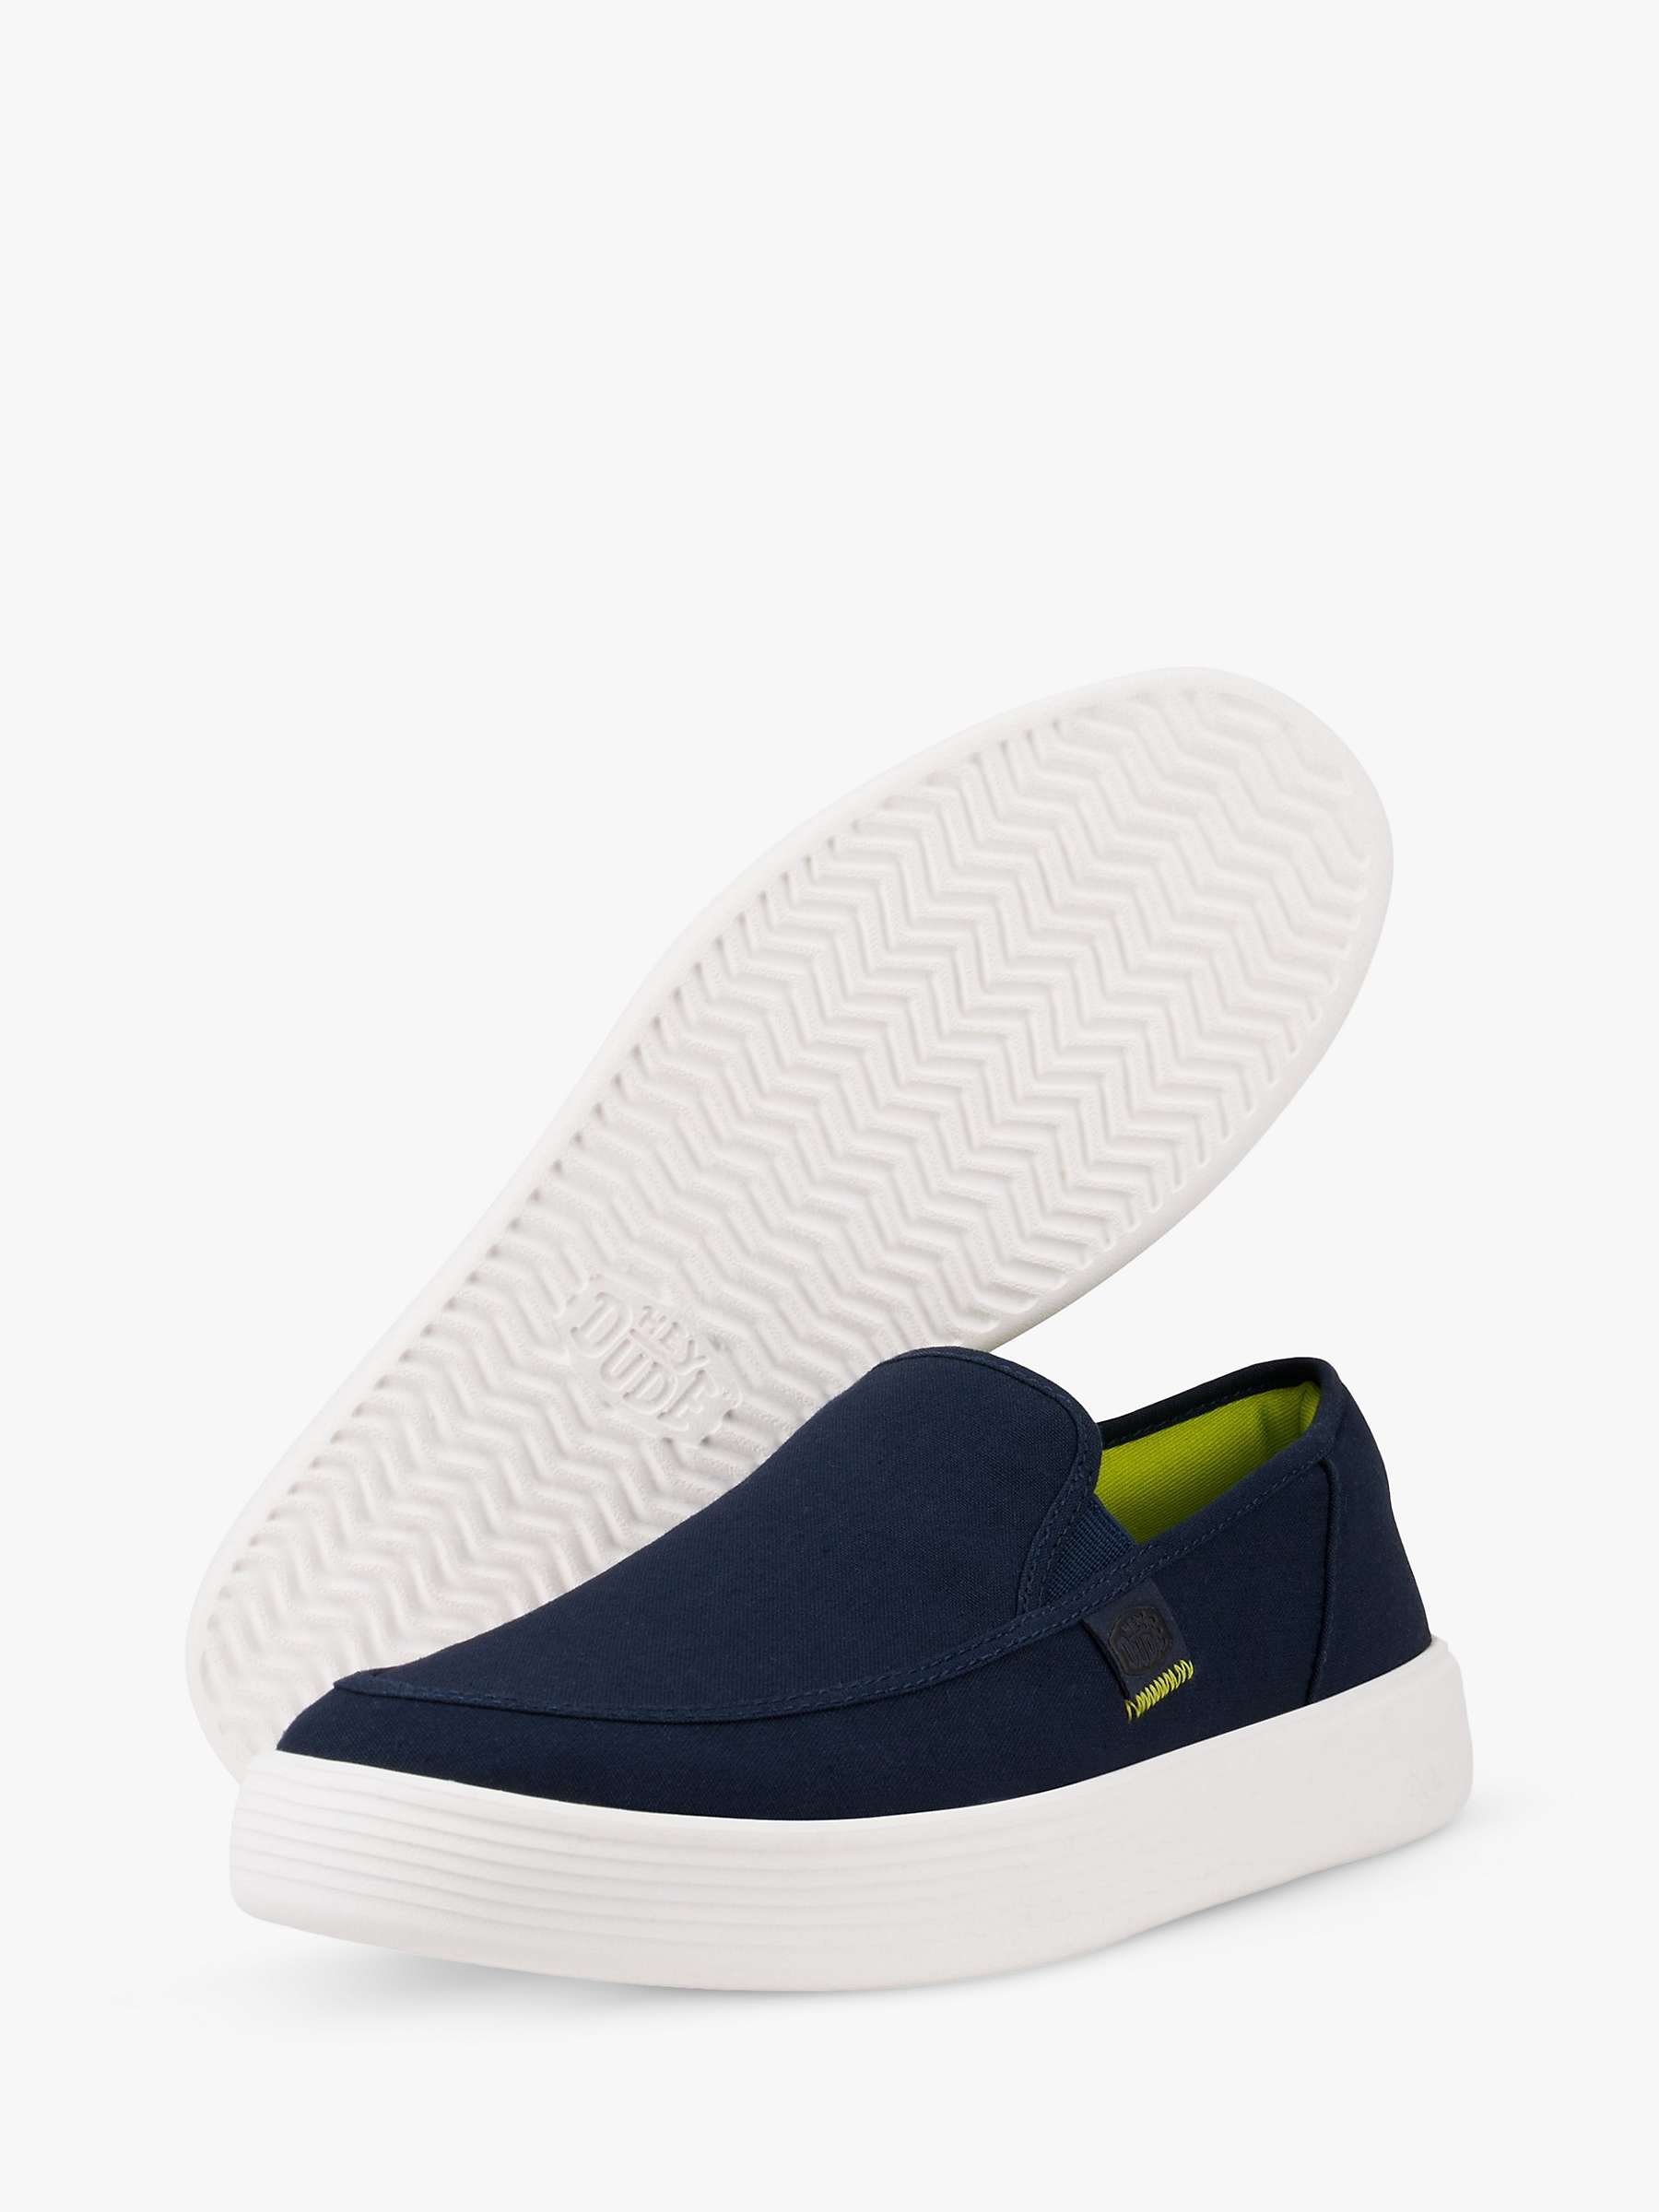 Buy Hey Dude Sunapee Canvas Shoes, Navy Online at johnlewis.com